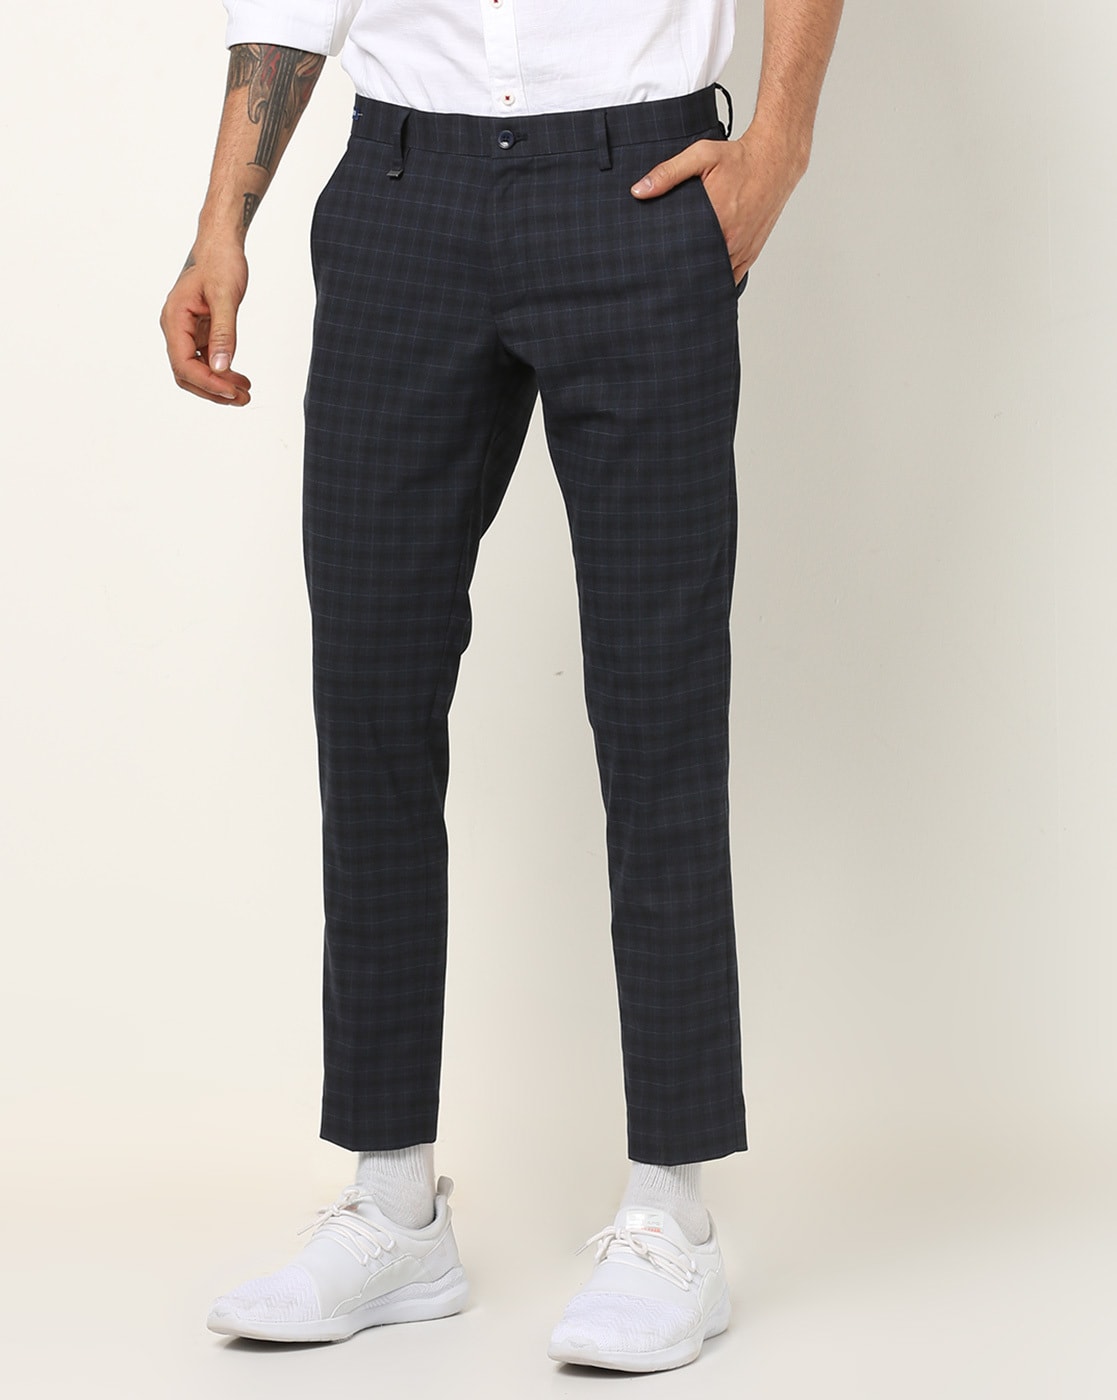 2021 British Style Mens Slim Fit Business Office Pants Men Simple & Formal,  Ankle Length, Available From Yansuhuan, $42.12 | DHgate.Com